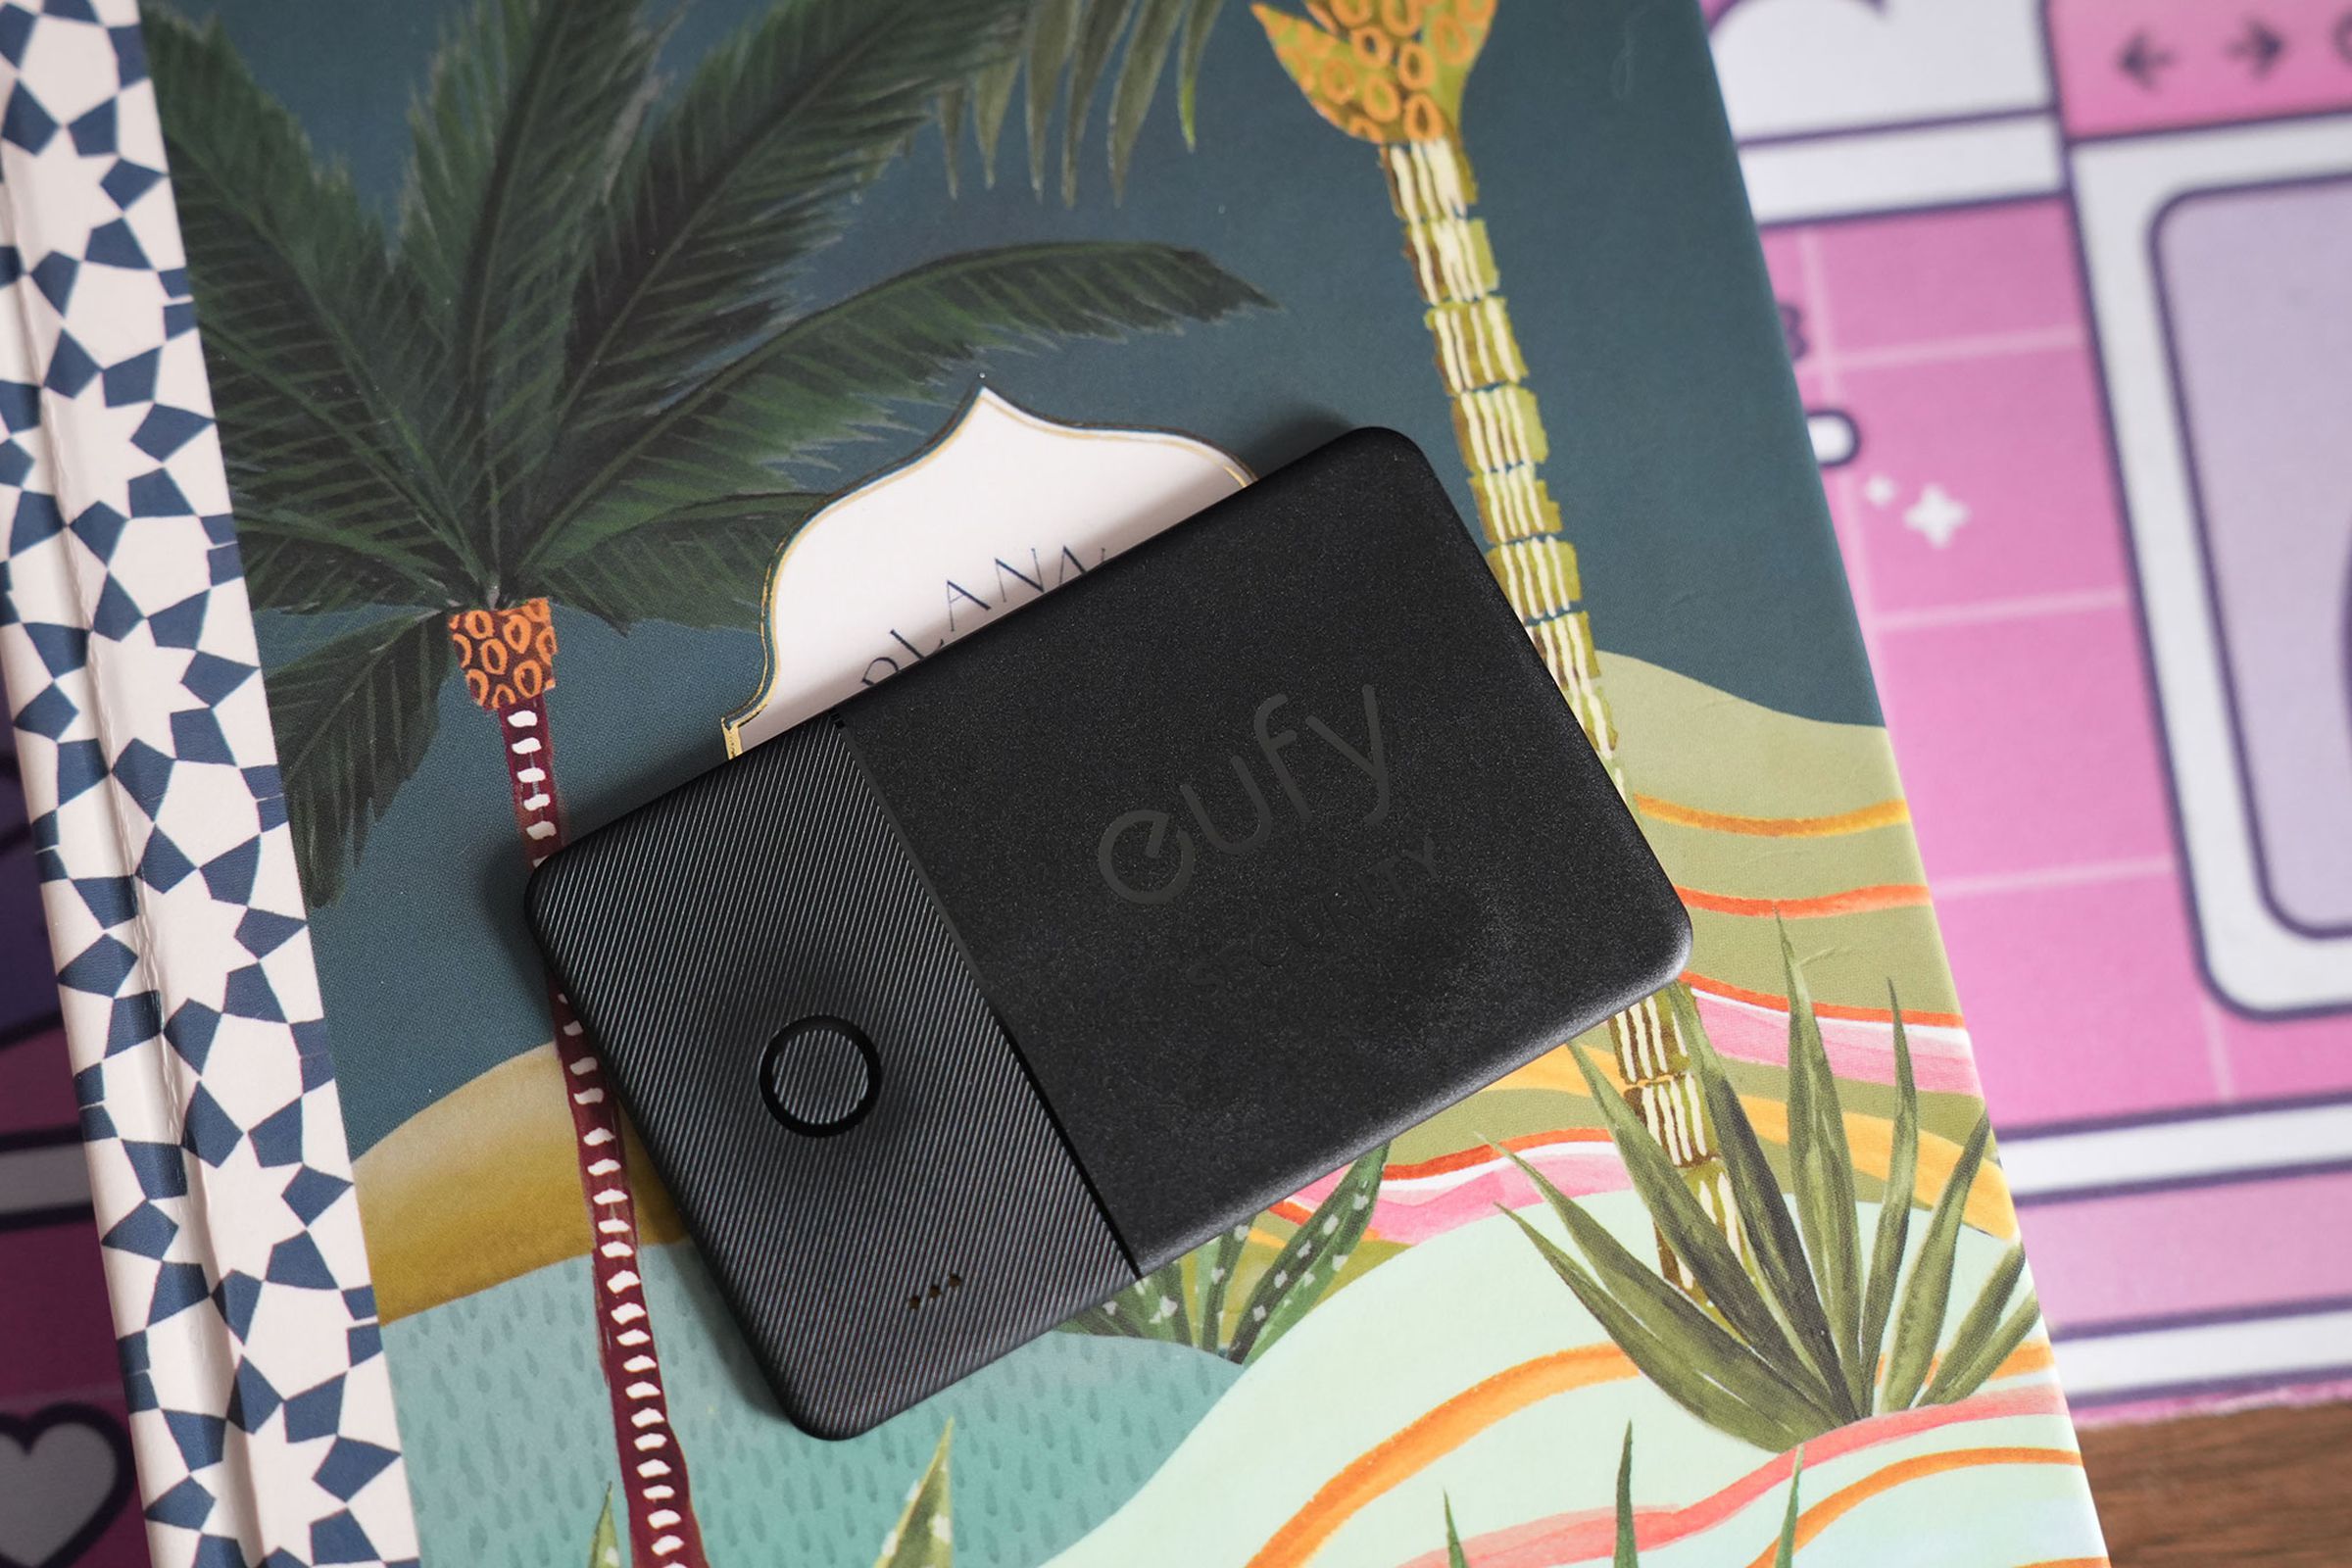 Eufy SmartTrack Card on top of a colorful notebook